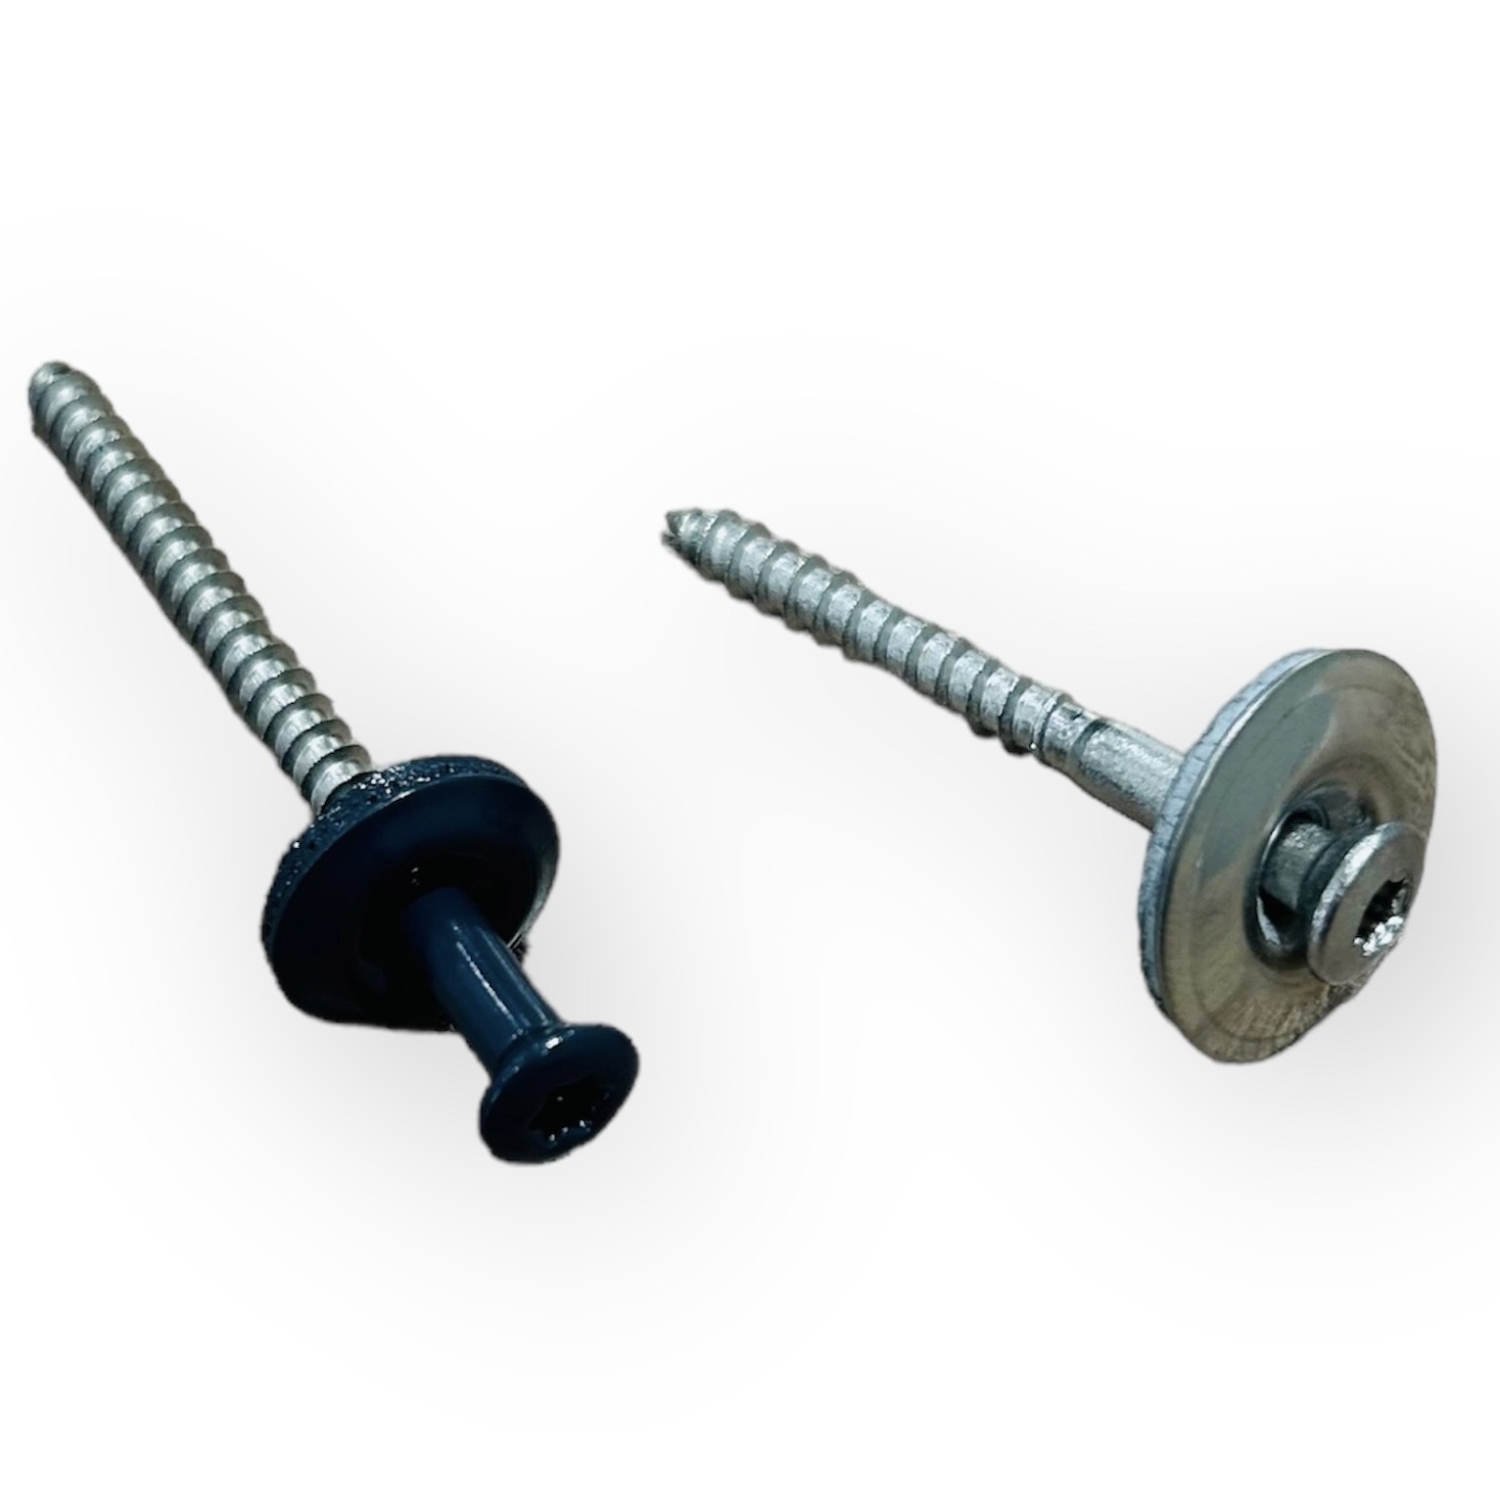 Nova Fastener - Stainless Steel Screw with painted washers